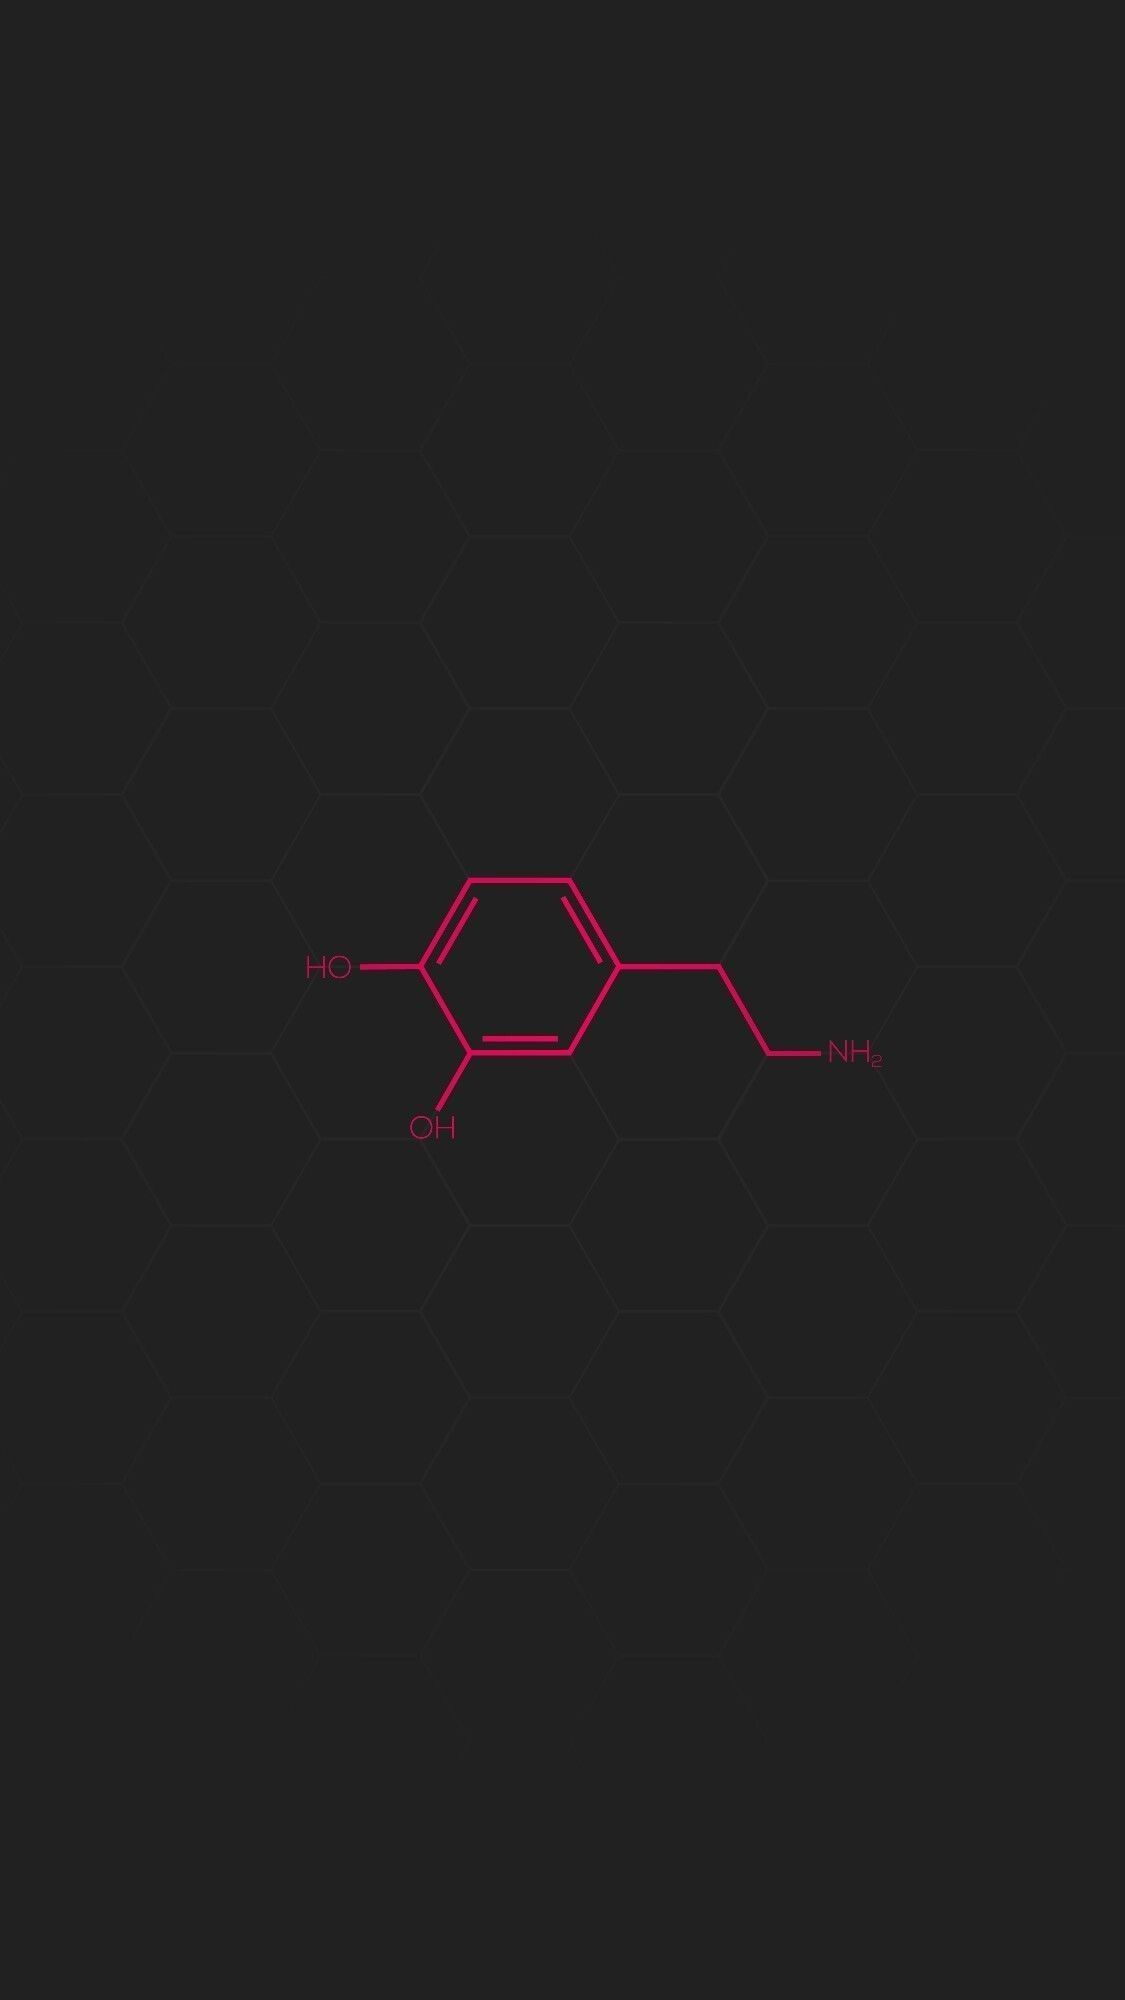 The chemical structure of a molecule in black and pink - Chemistry